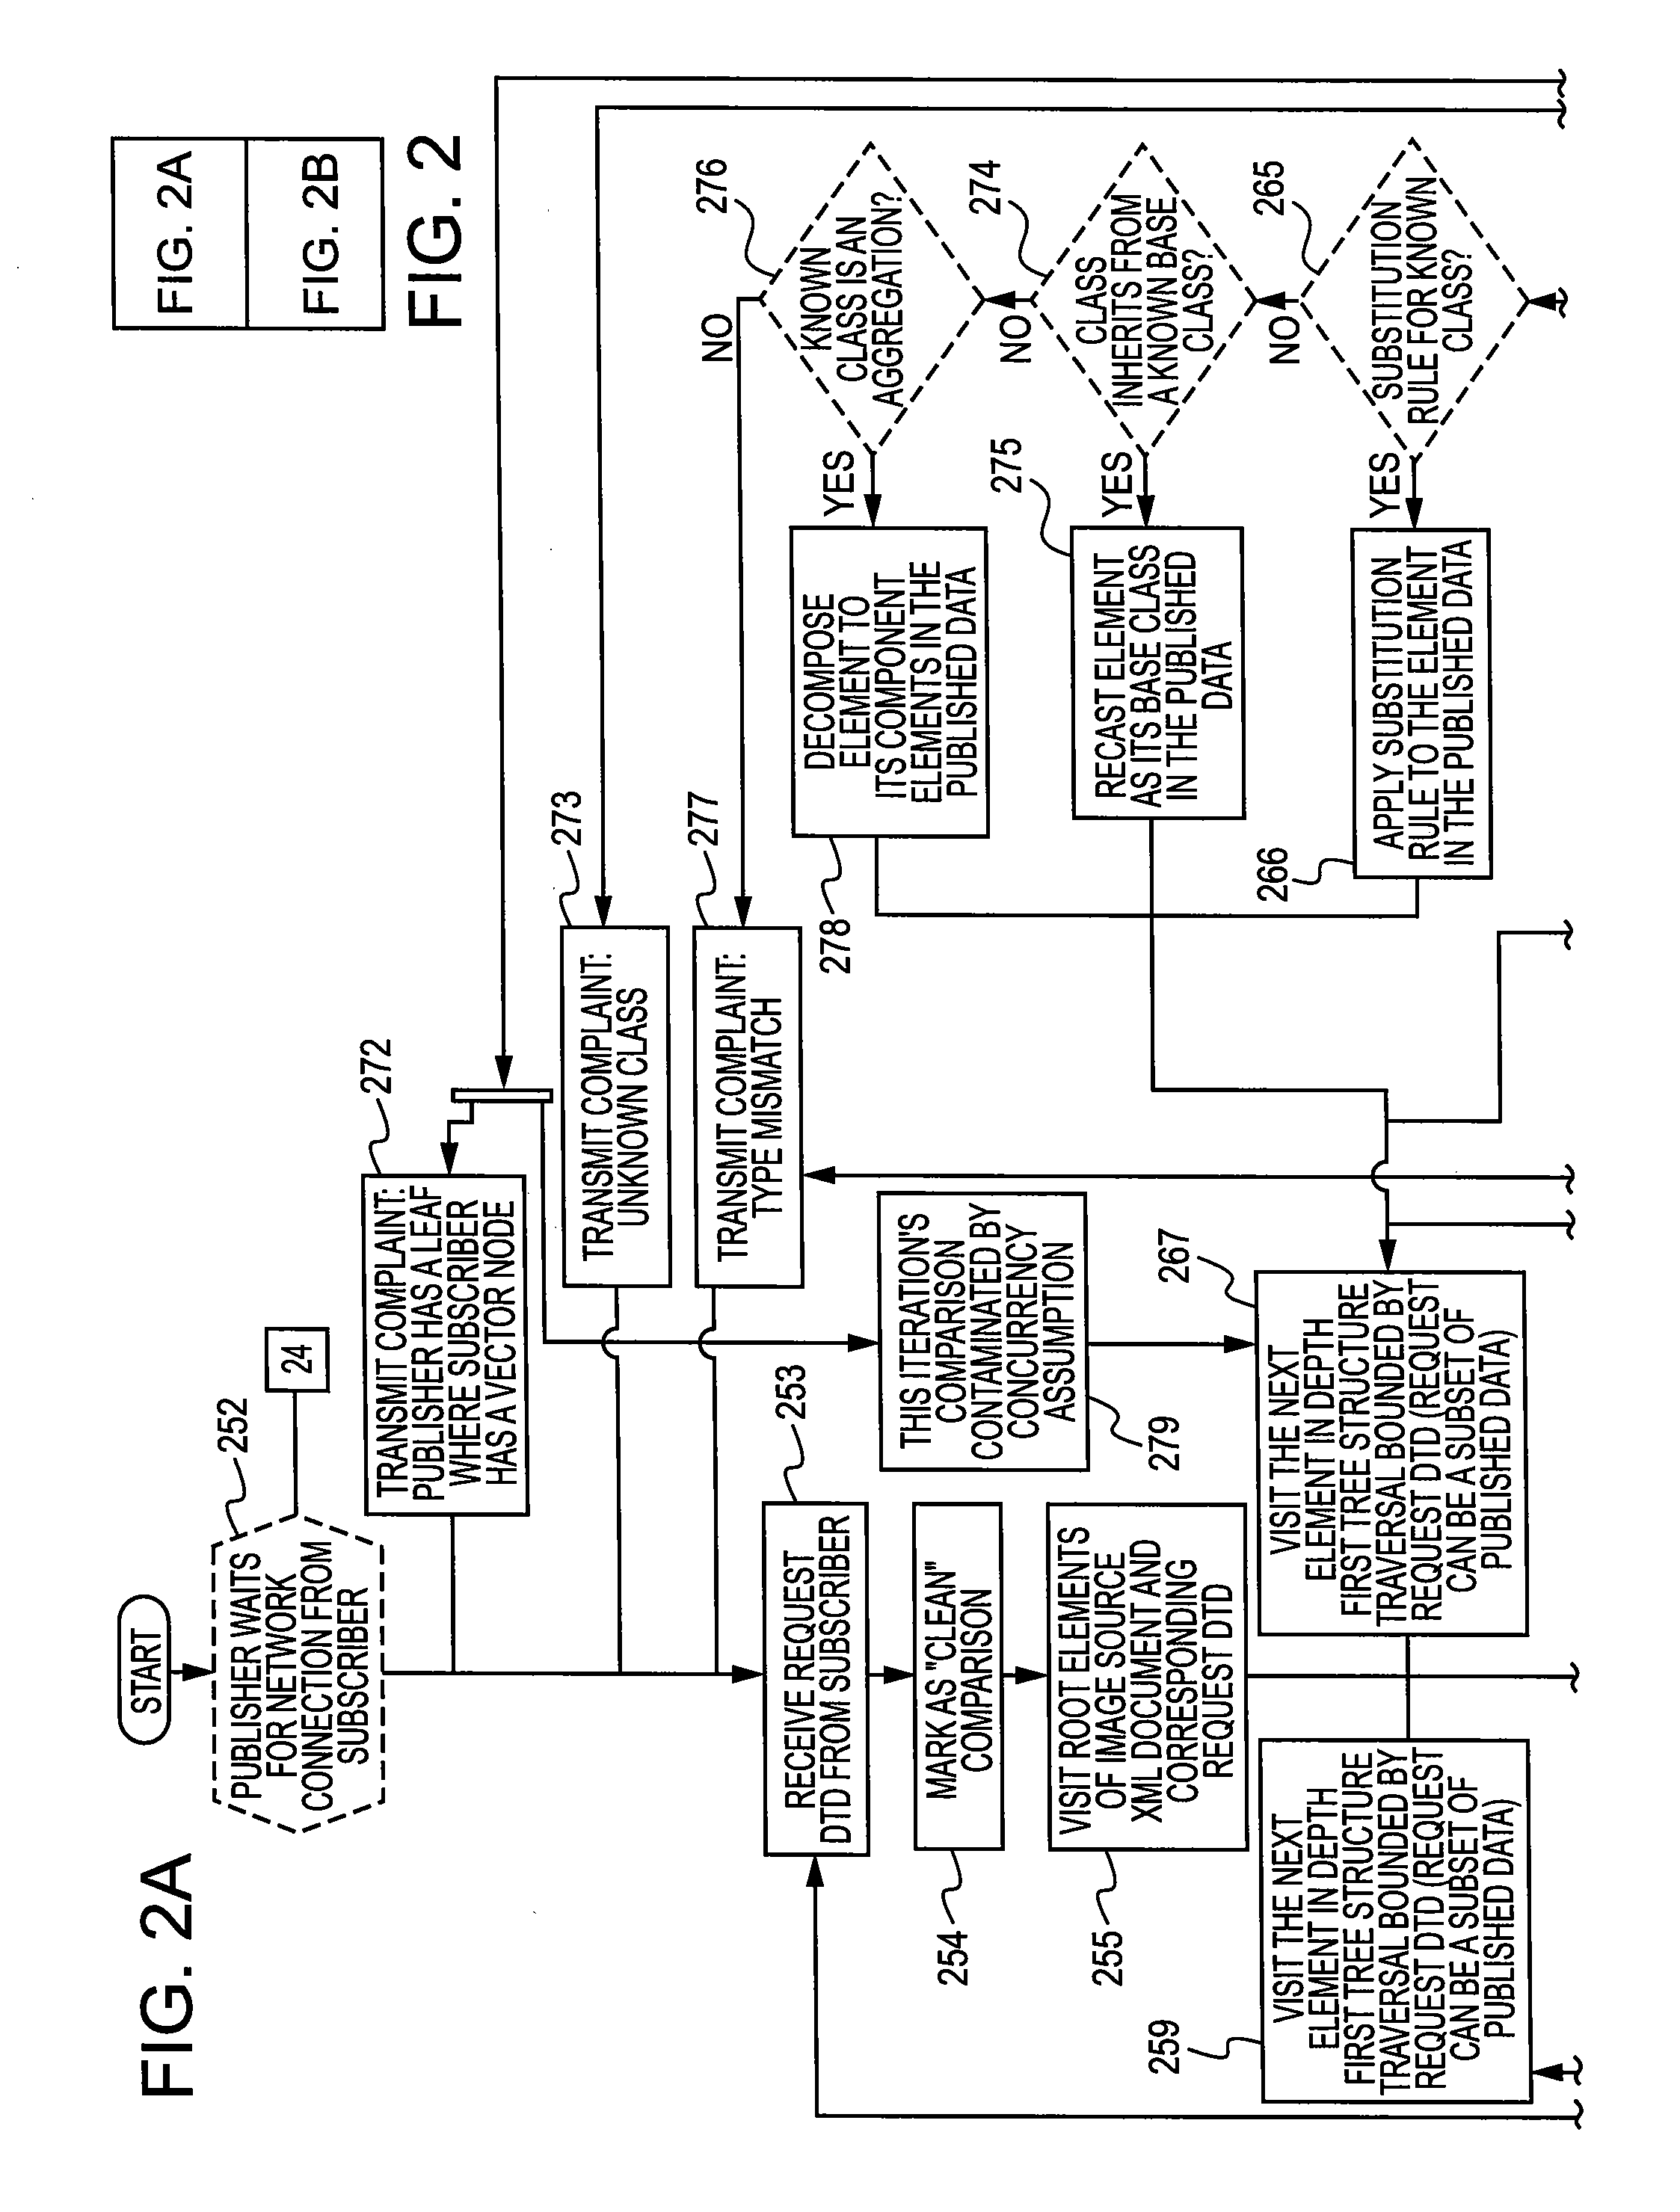 Adaptive image format translation in an ad-hoc network